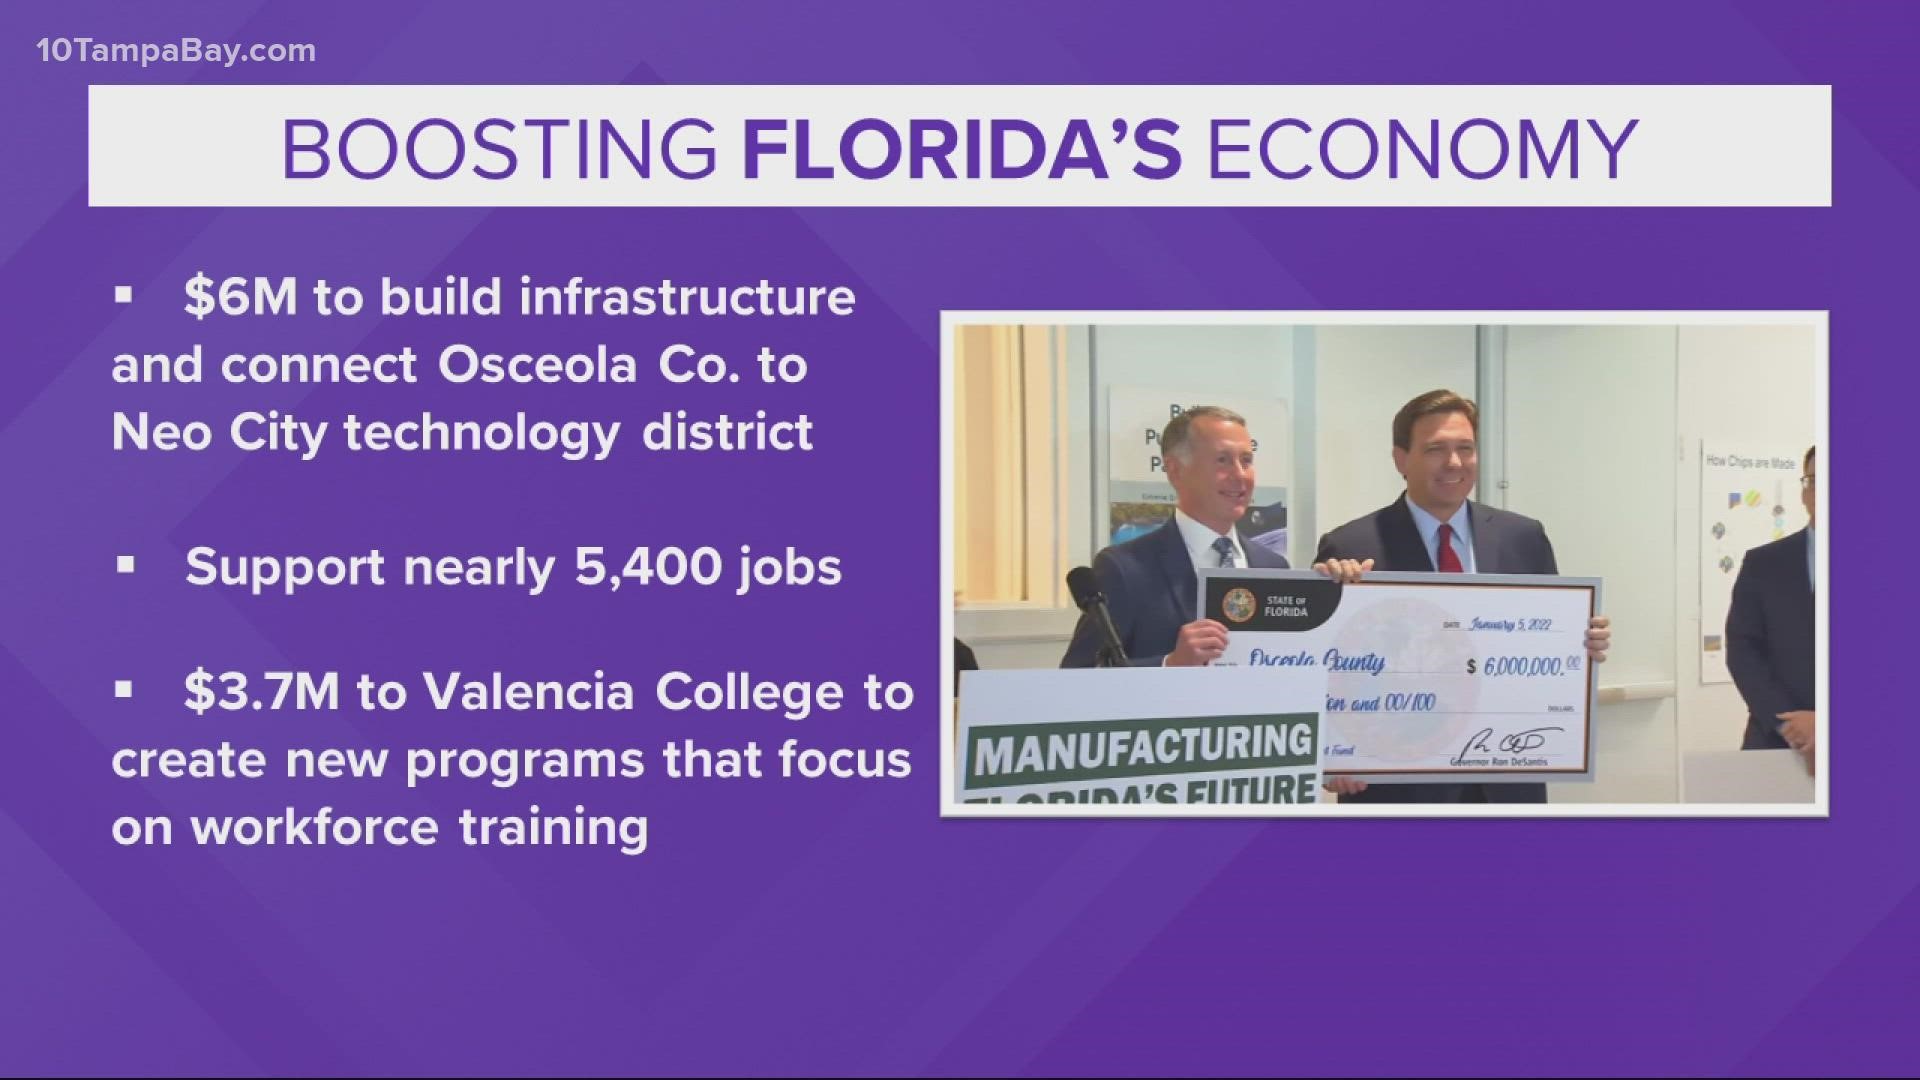 The governor said $6 million will go toward manufacturing development in Osceola County while $3.7 million will go toward vocational training at Valencia College.